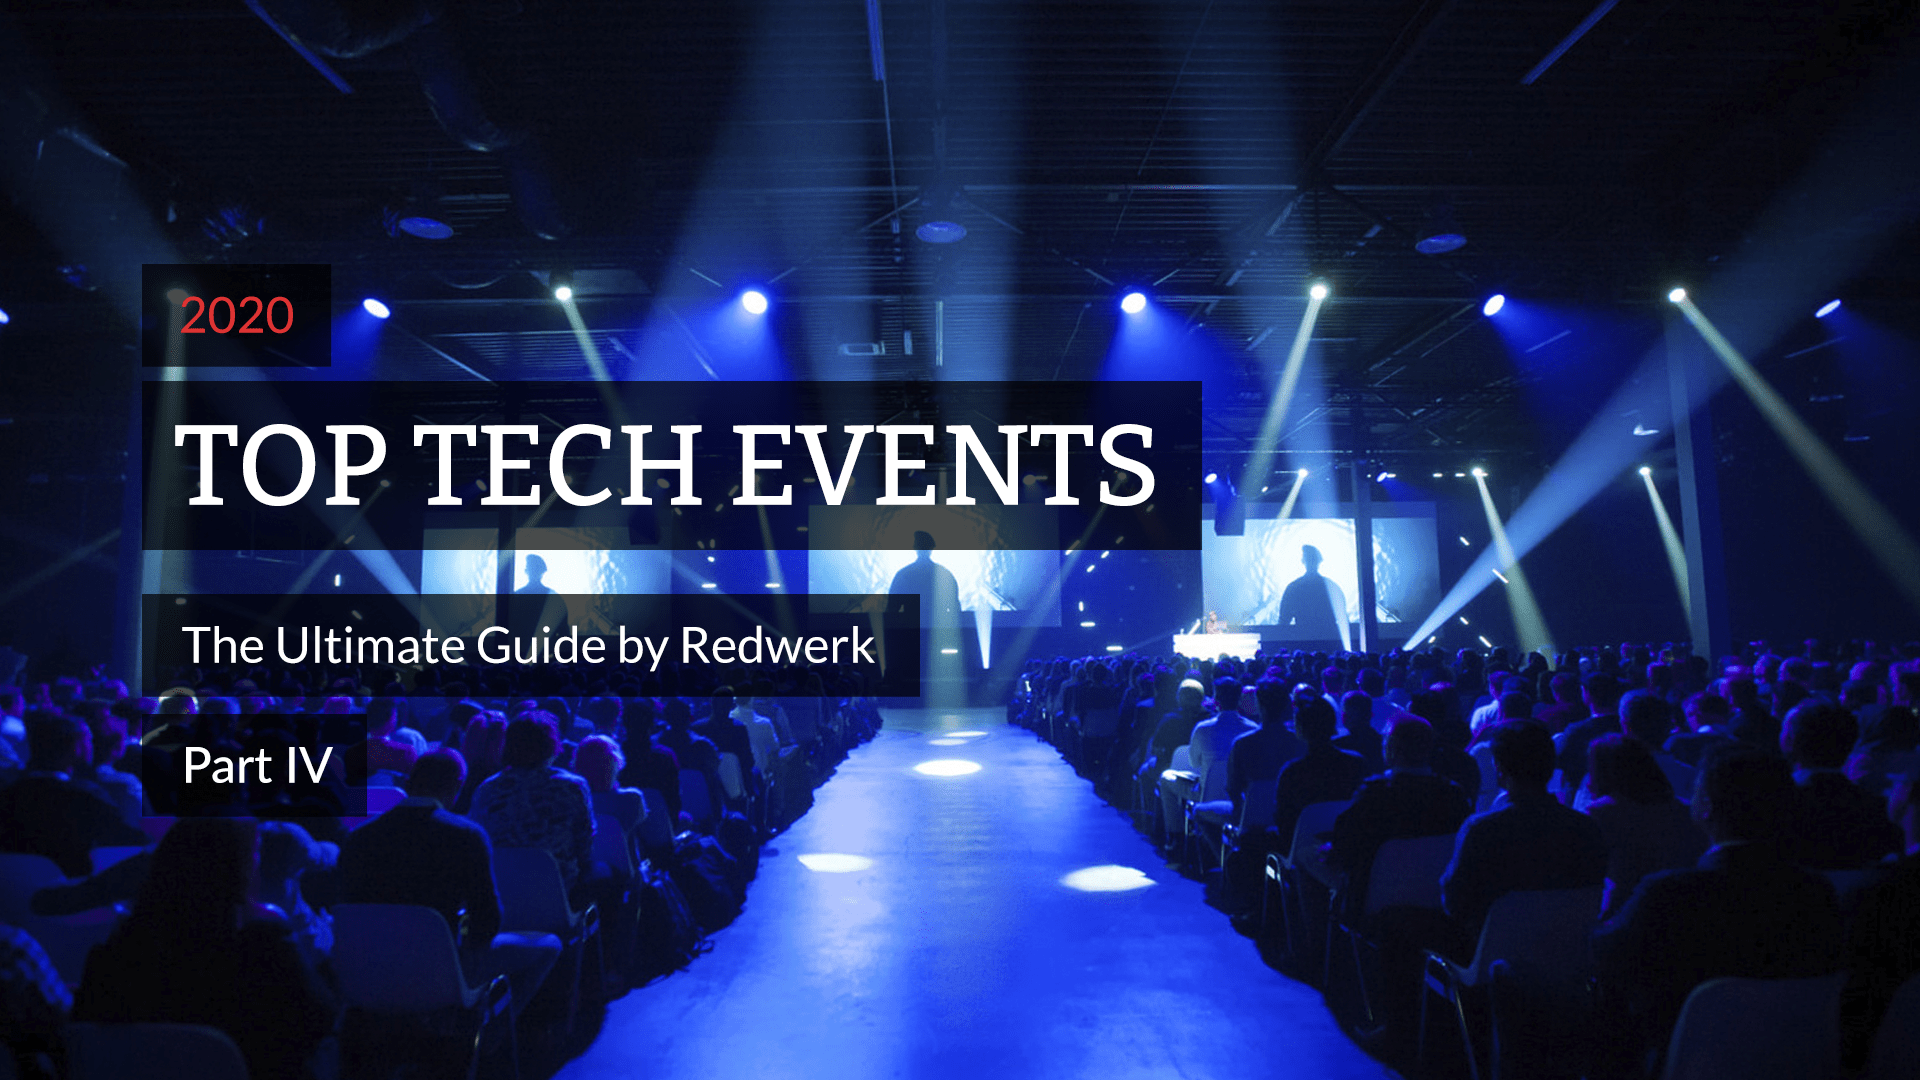 Top Tech Events in 2020: Quarter 4 Ultimate Guide